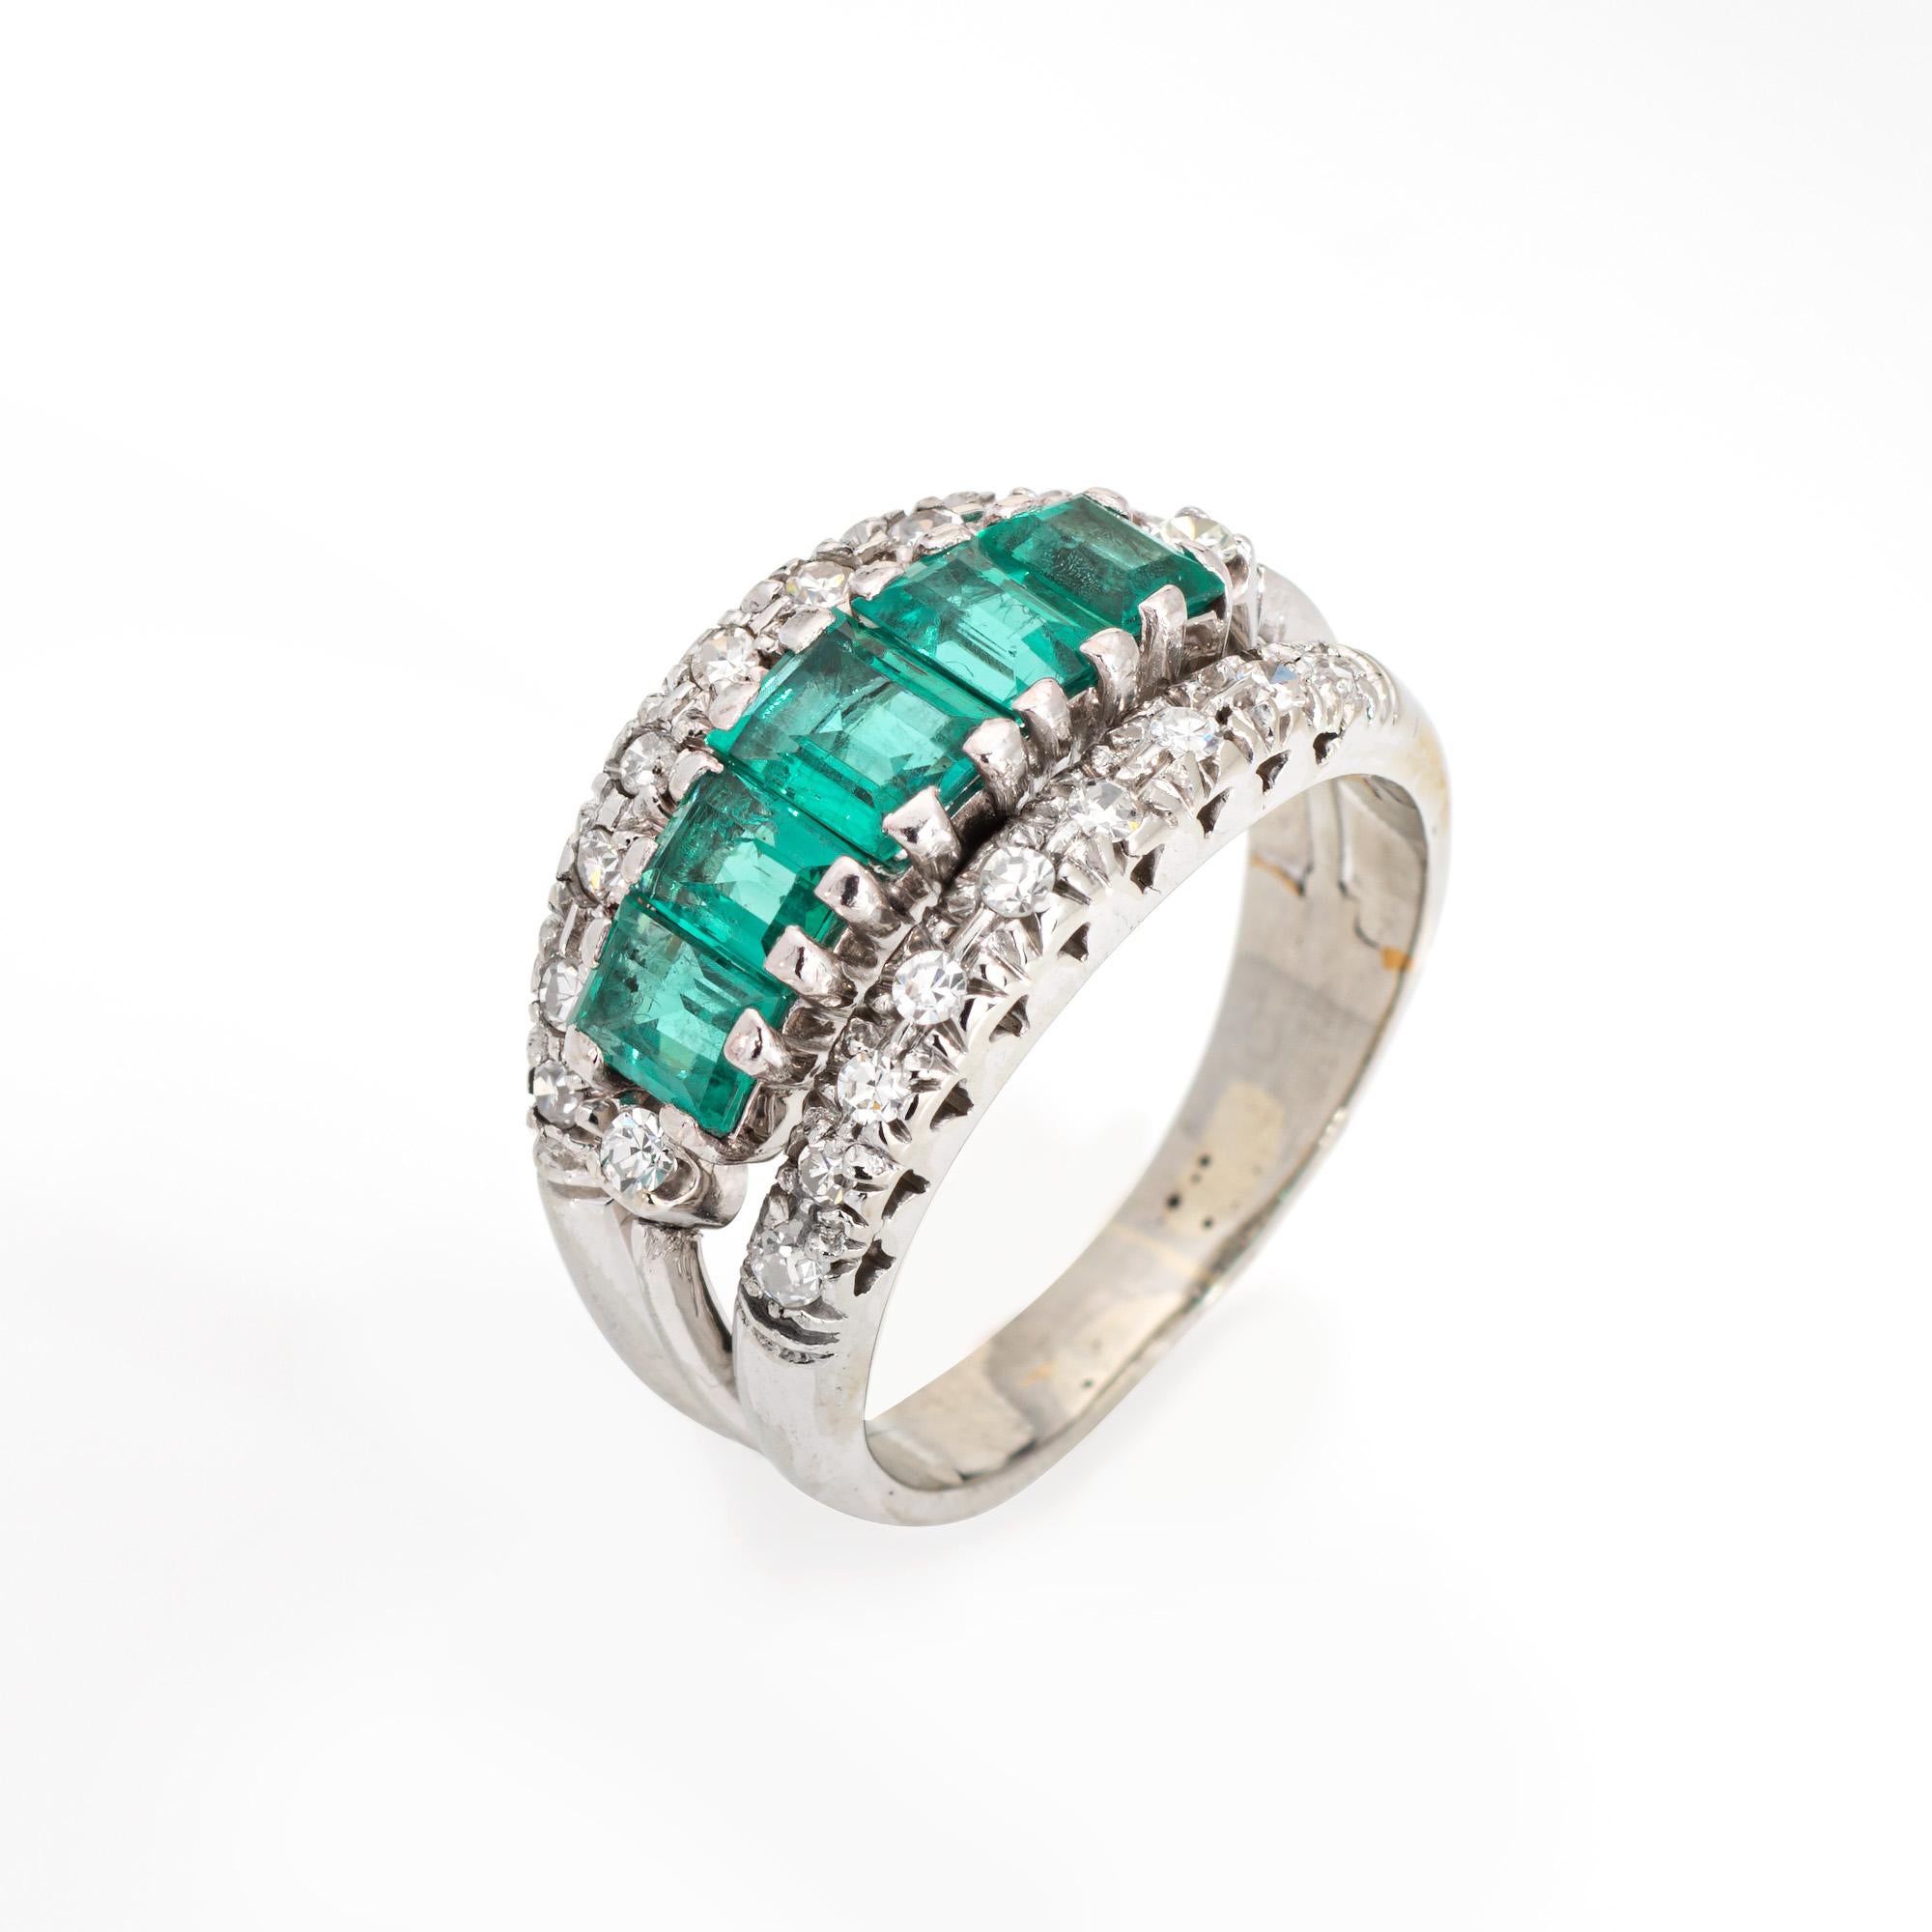 Stylish and finely detailed diamond & emerald ring crafted in 18 karat white gold (circa 1960s to 1970s).

20 single cut diamonds total an 0.10 carats (estimated at H-I color and SI1-I1 clarity). Five emerald cut emeralds measure from 4mm x 3mm to